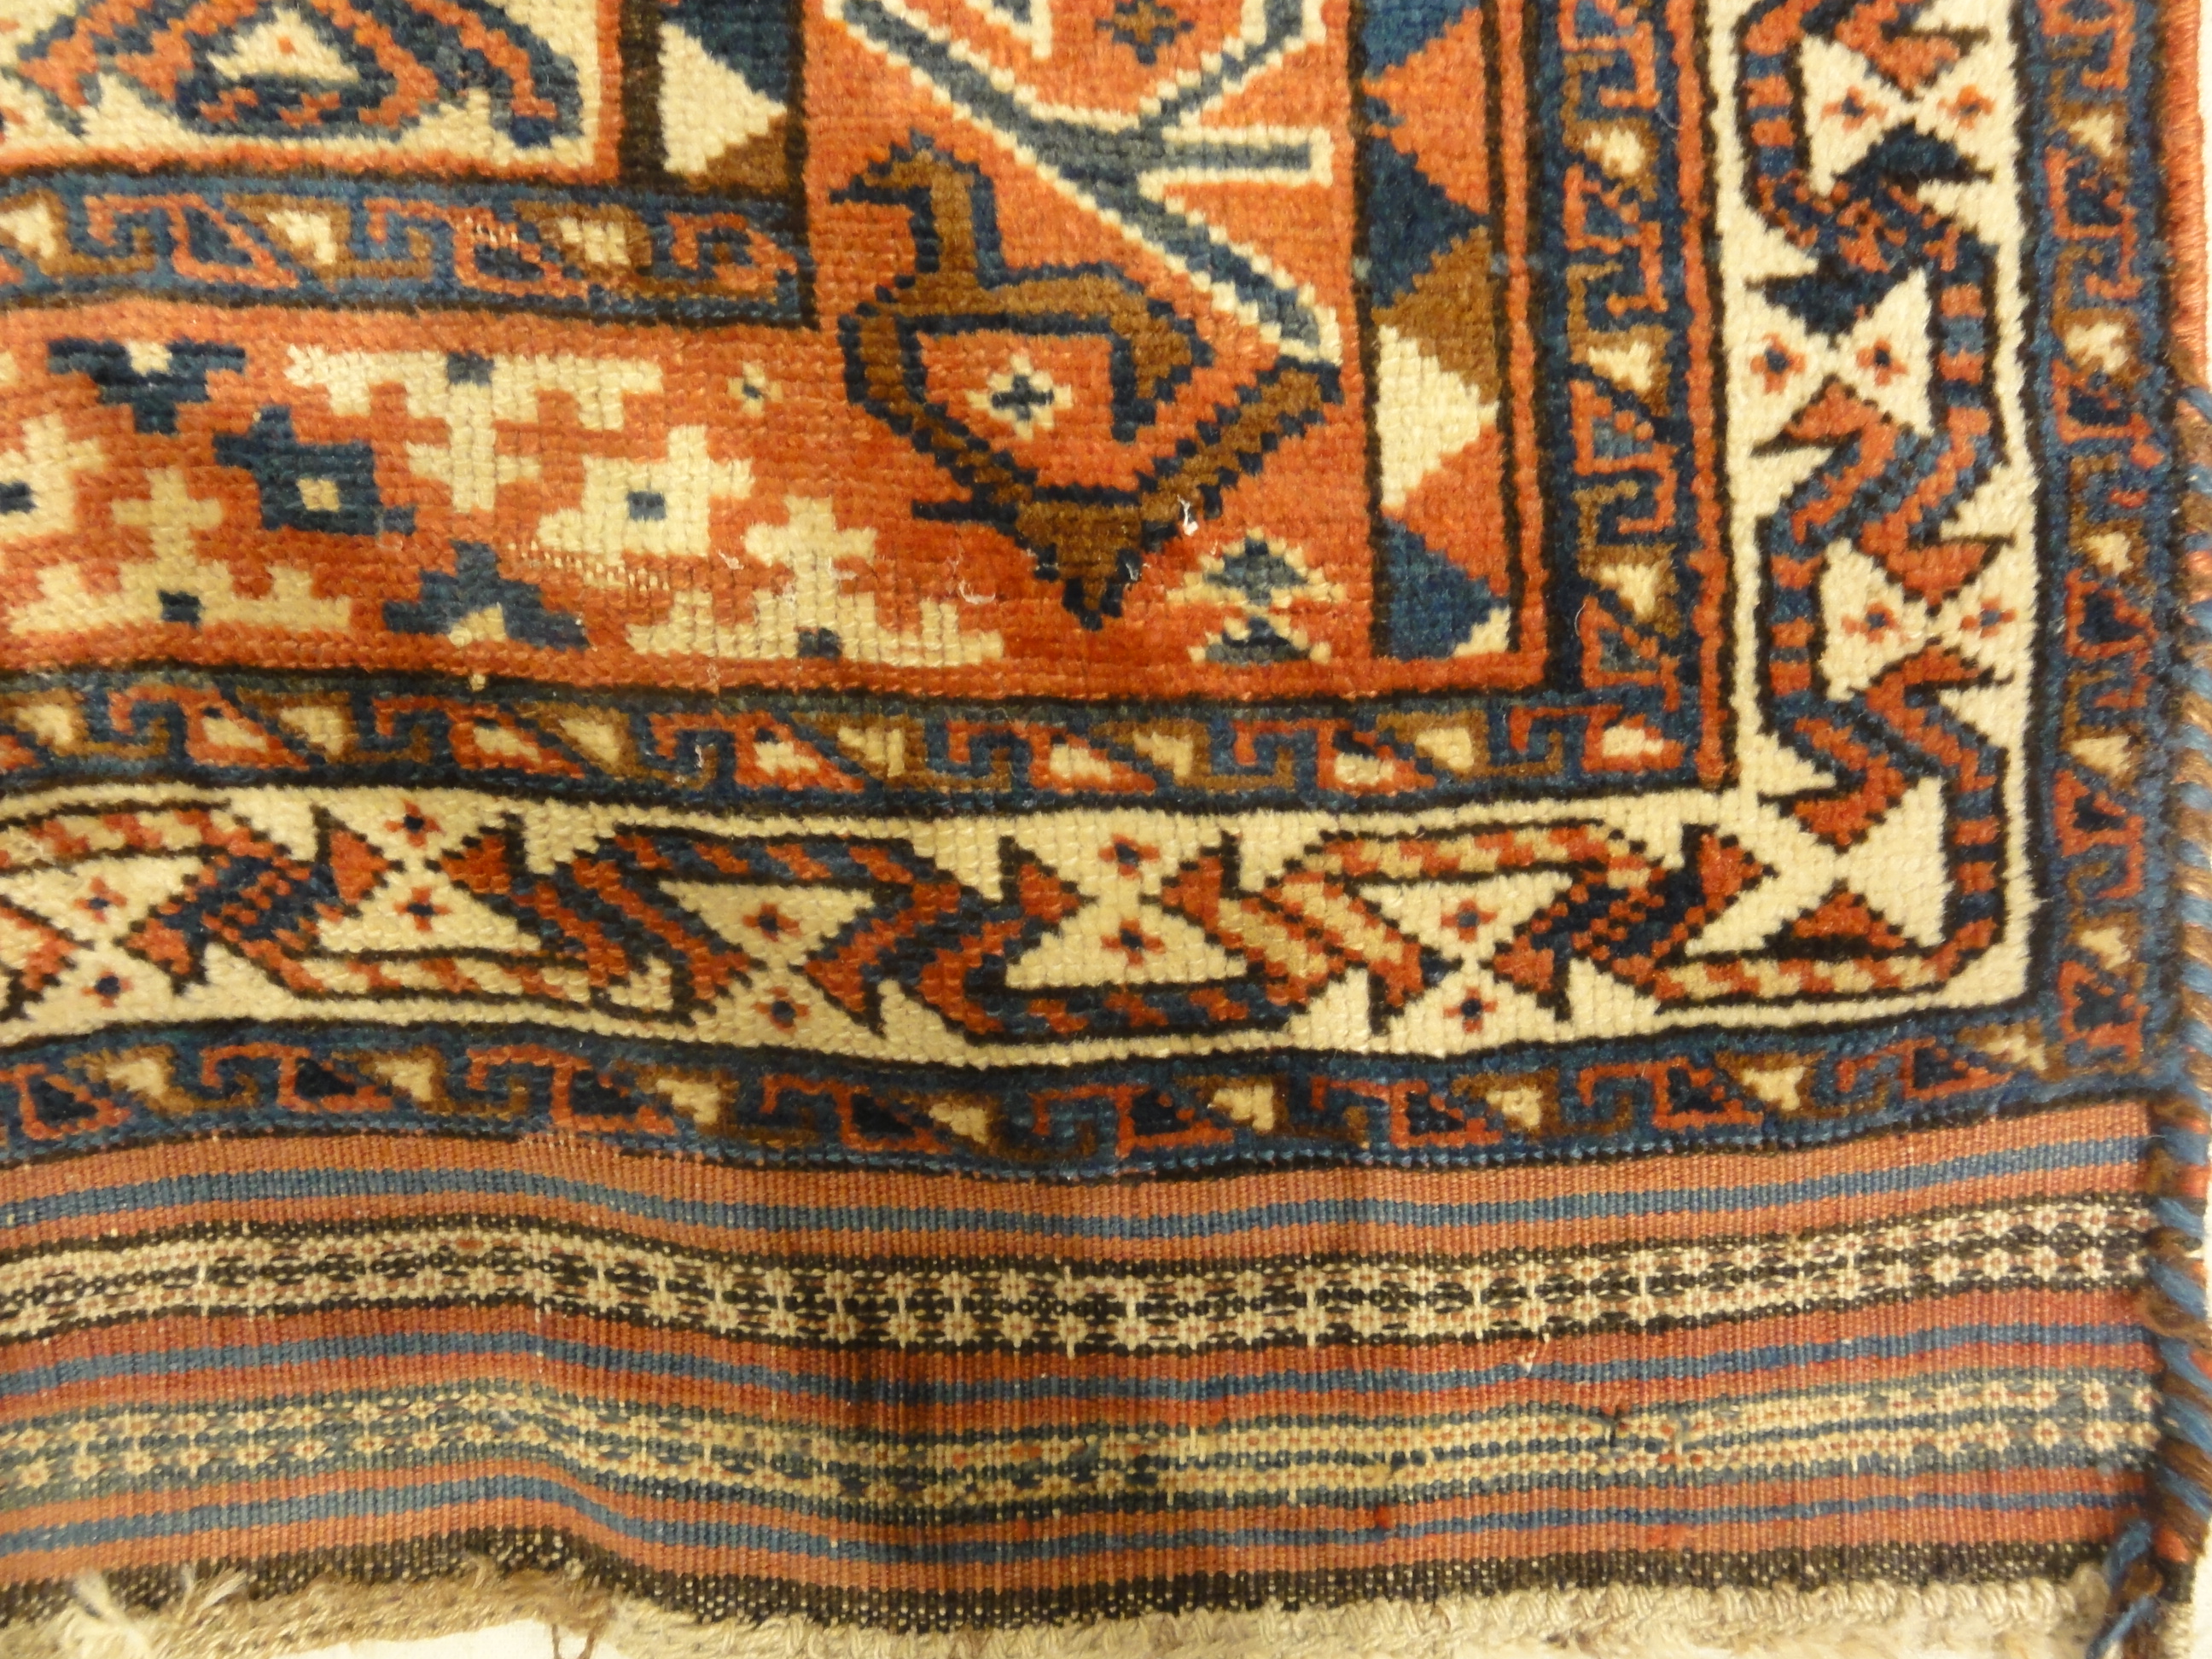 Antique Lori Persian Tribal Rug Circa 1880. A piece of genuine authentic antique woven carpet art sold by Santa Barbara Design Center Rugs and More.